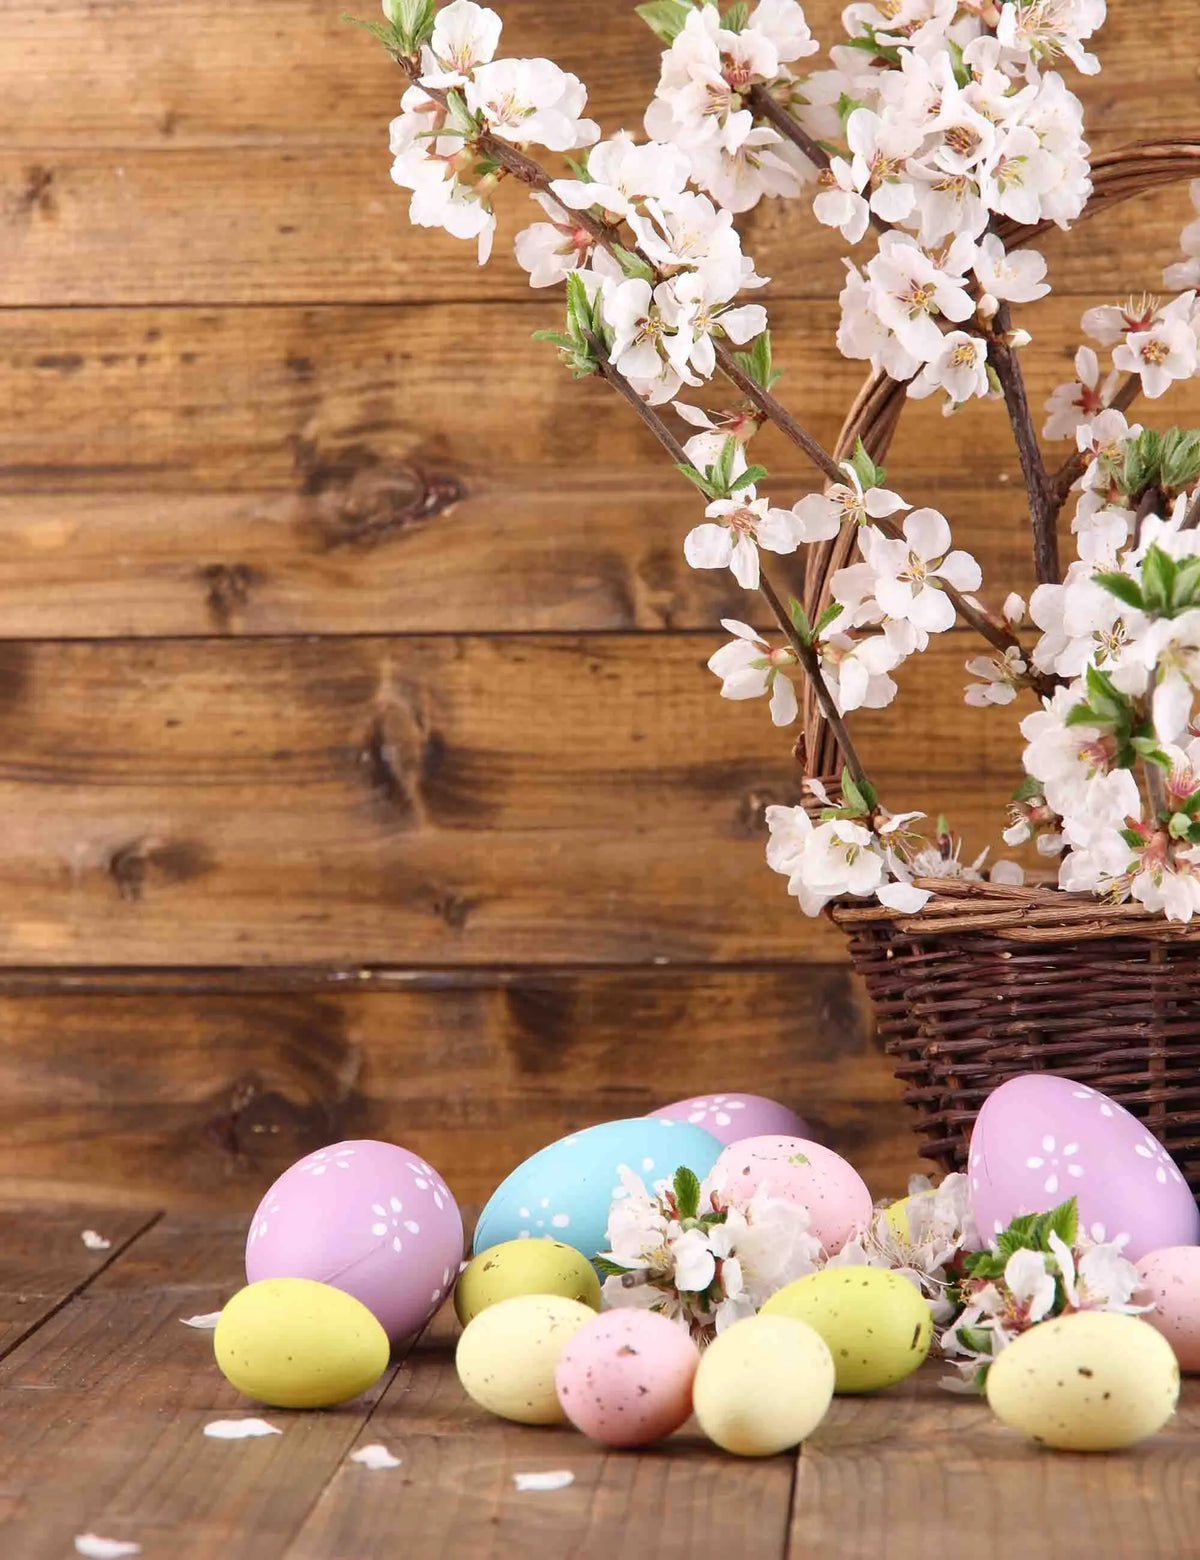 Easter Eggs On Wooden Floor And Cherry Blossom In Basket Backdrop Shopbackdrop